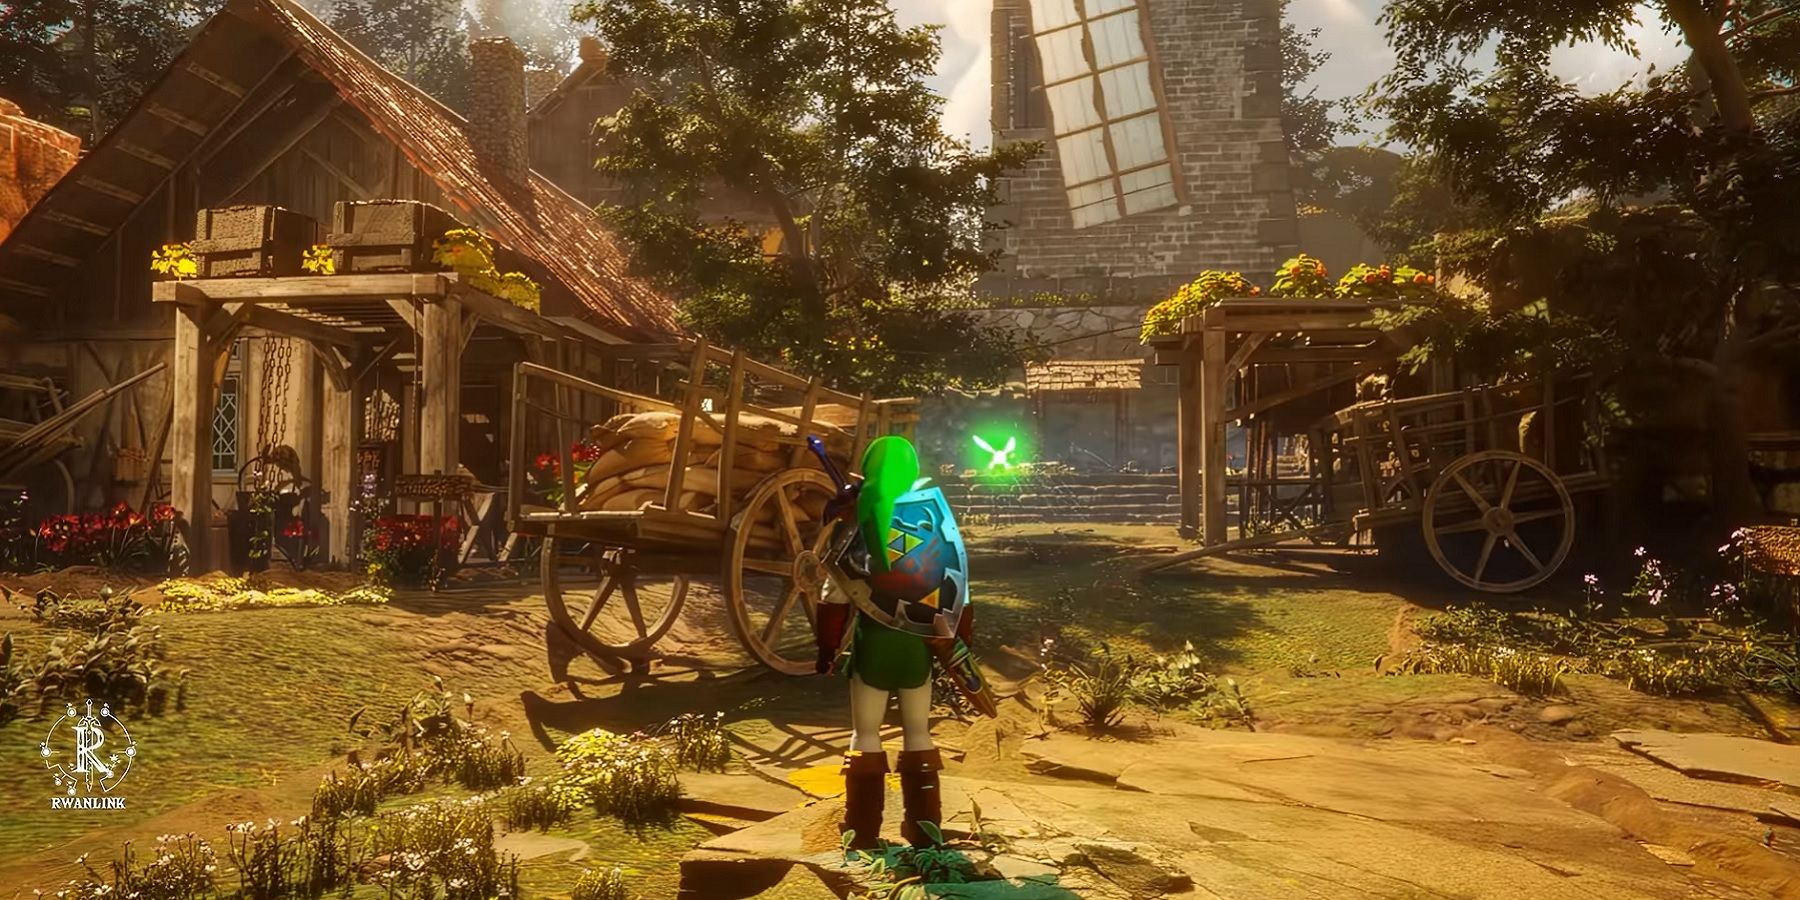 Screenshot from Ocarina of Time as imagined in Unreal Engine 5.